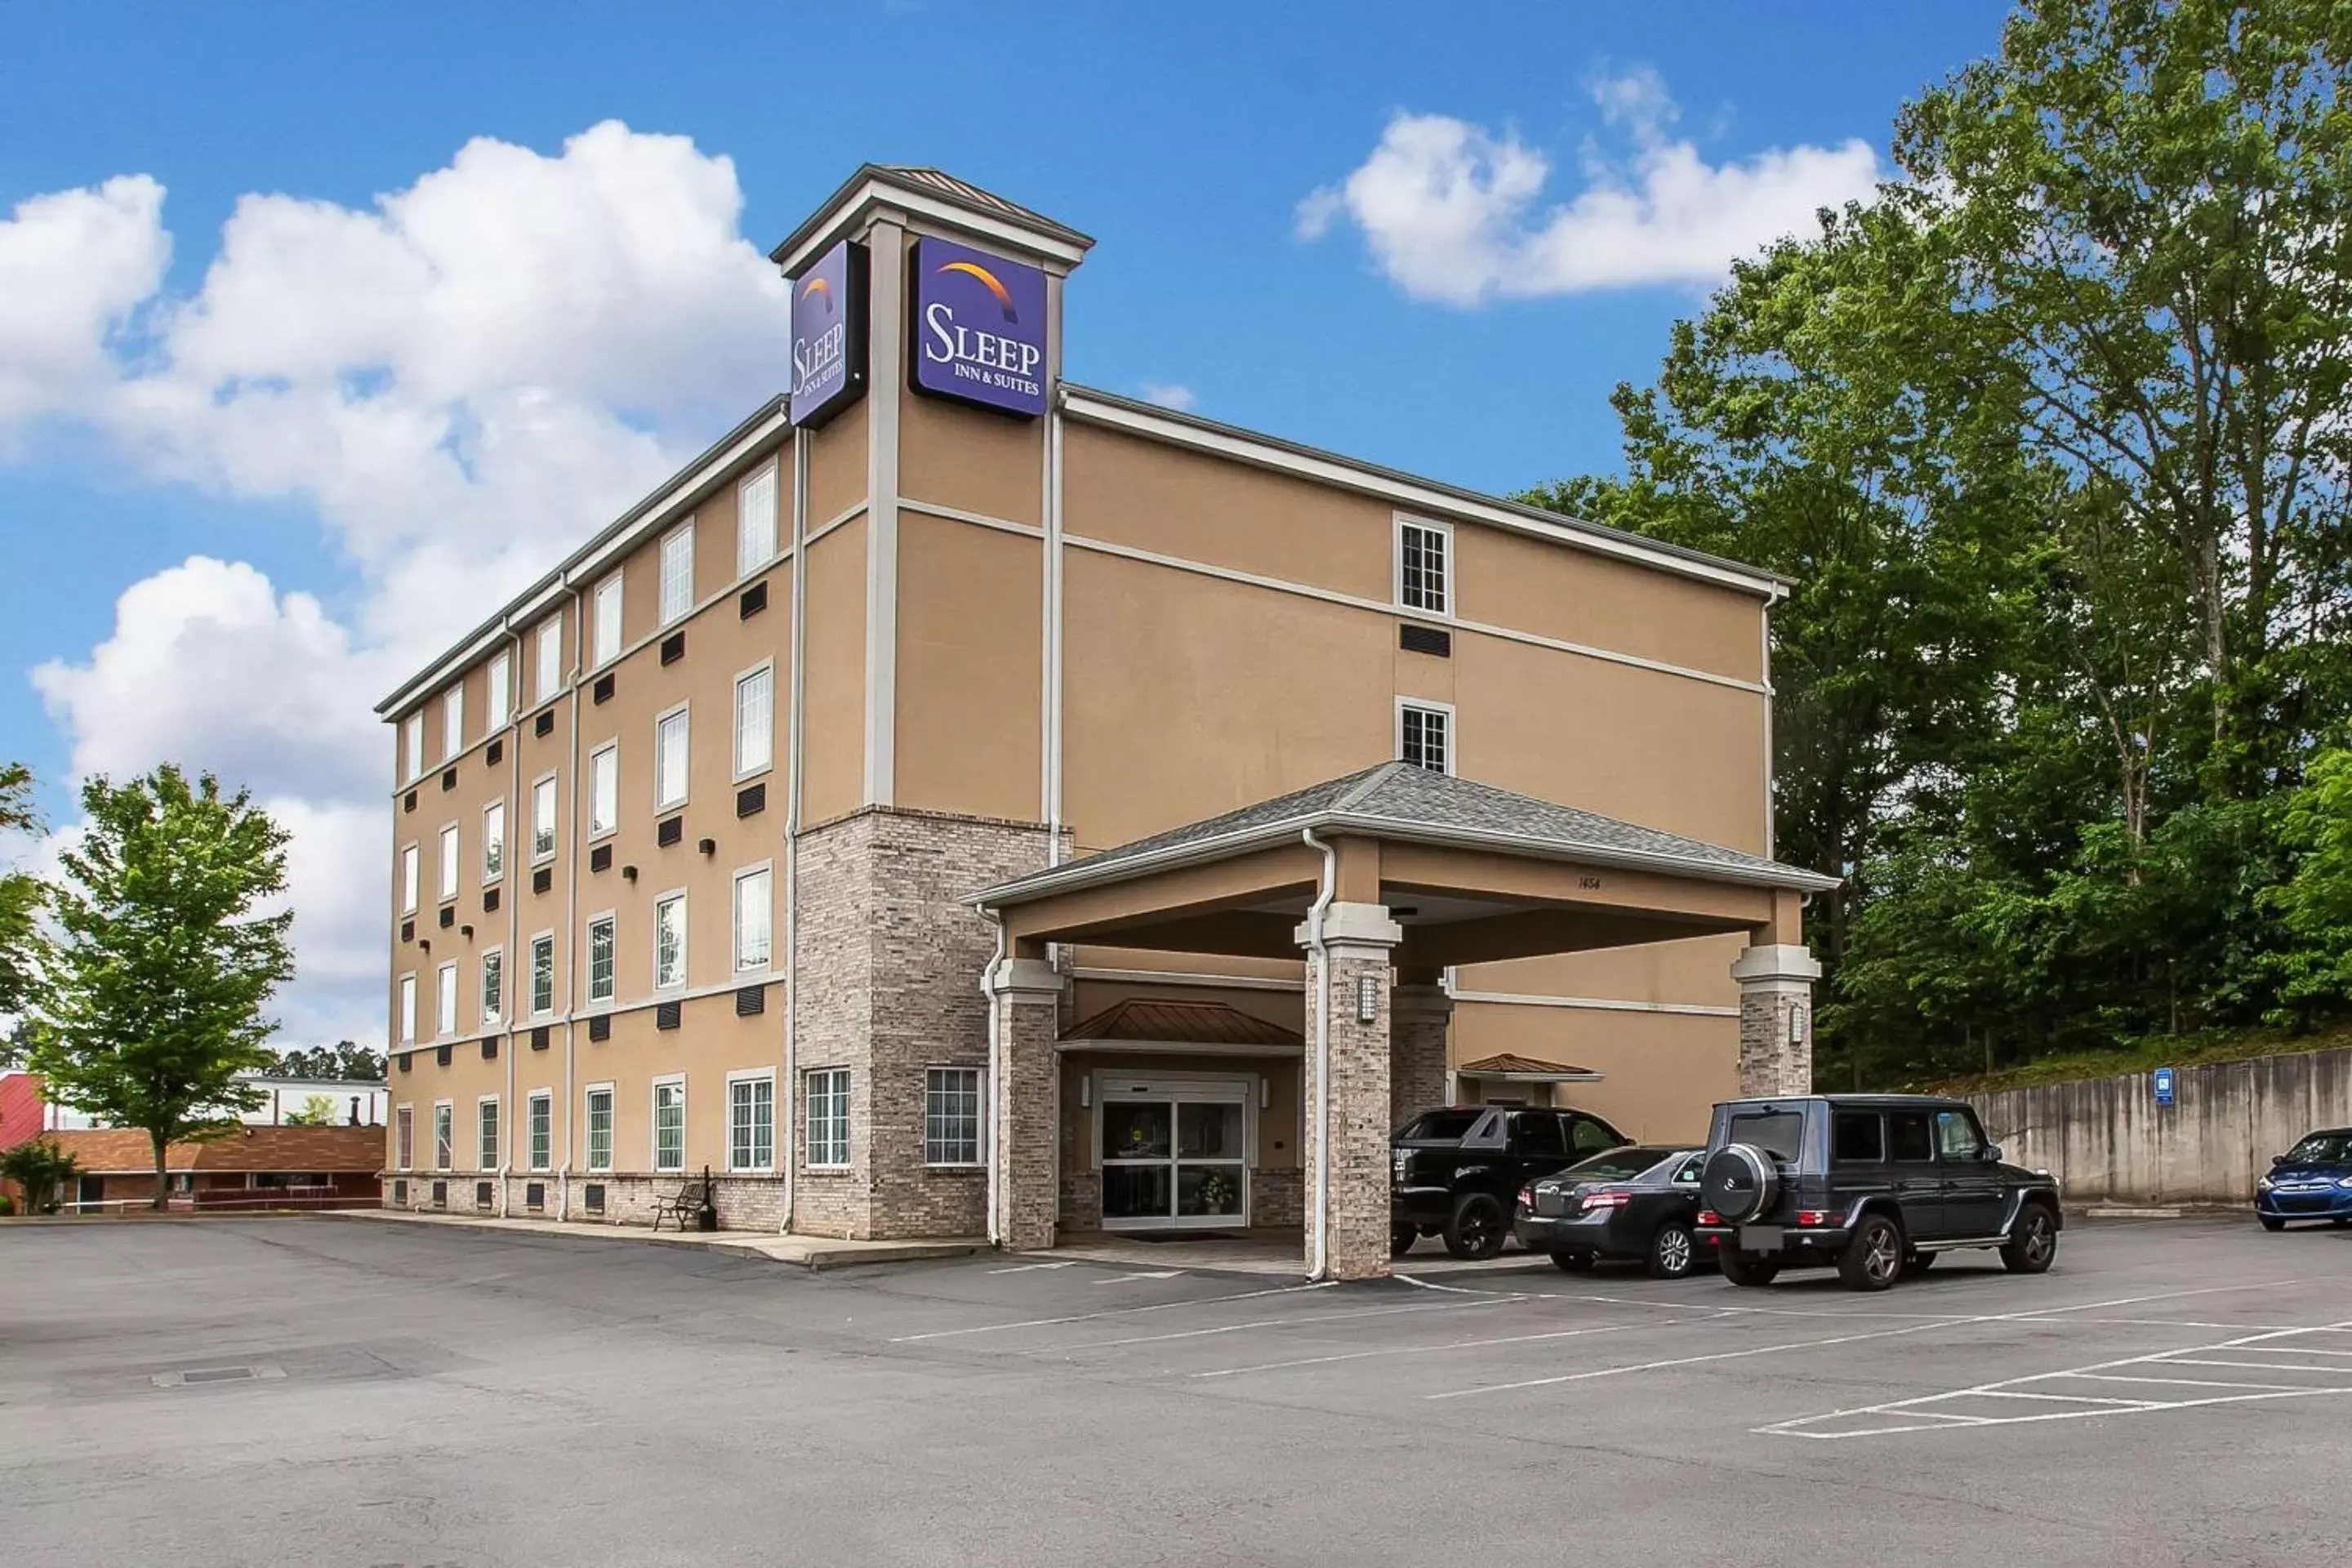 Property building in Sleep Inn & Suites at Kennesaw State University